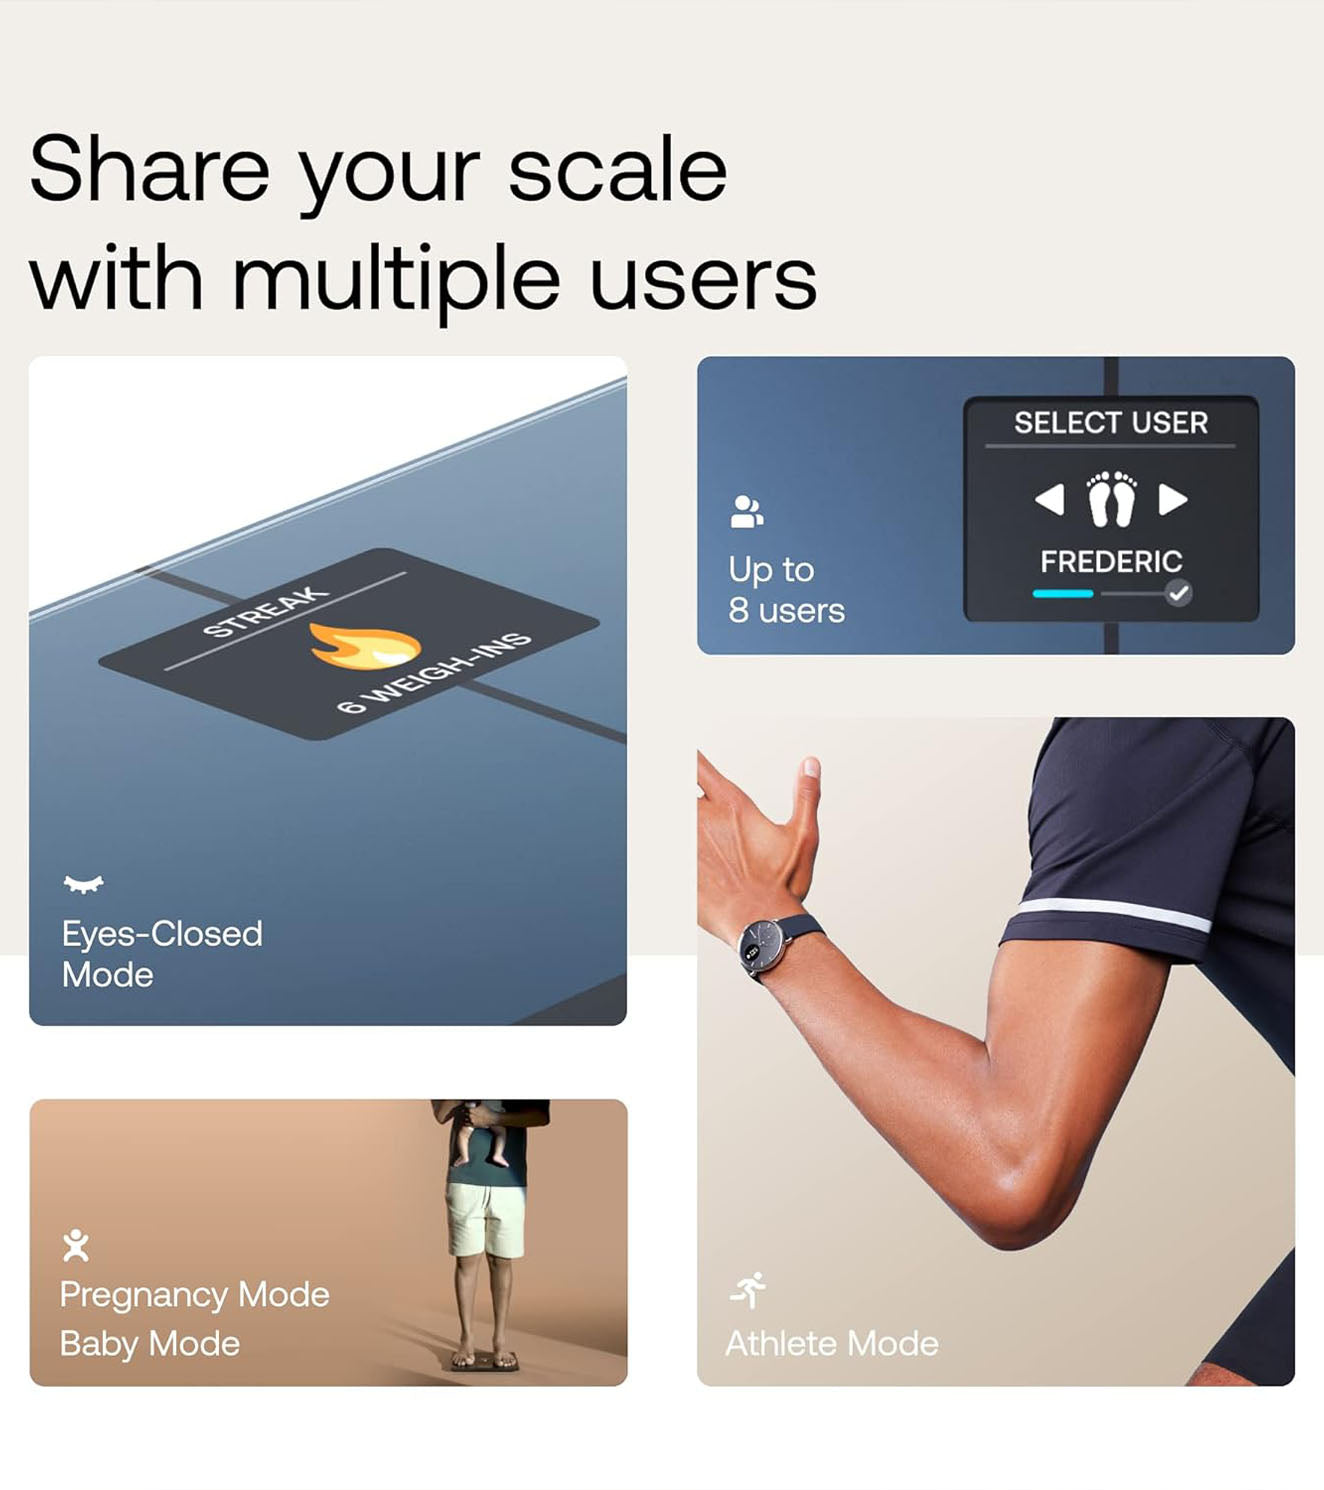 WITHINGS Body Smart Scale